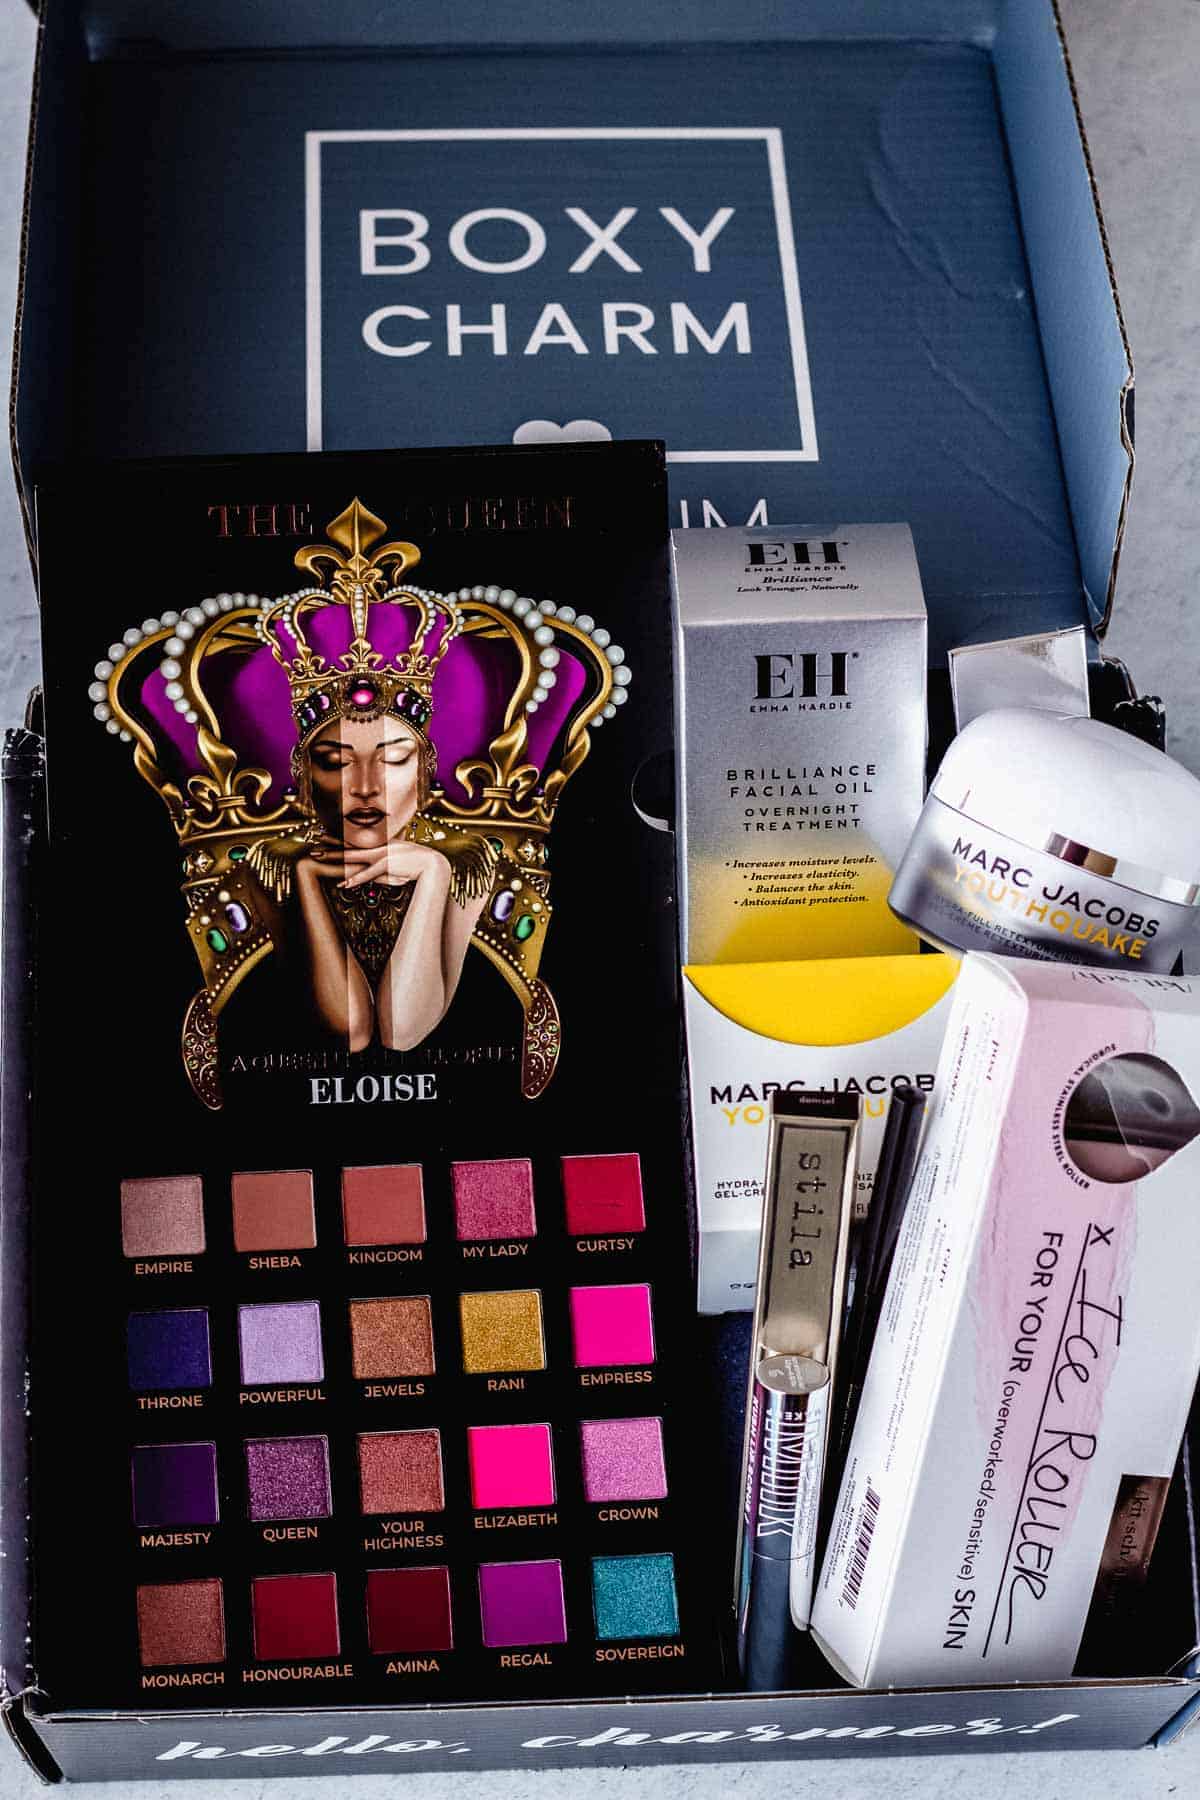 All of the items in my September 2020 Boxycharm Premium box displayed inside of the box